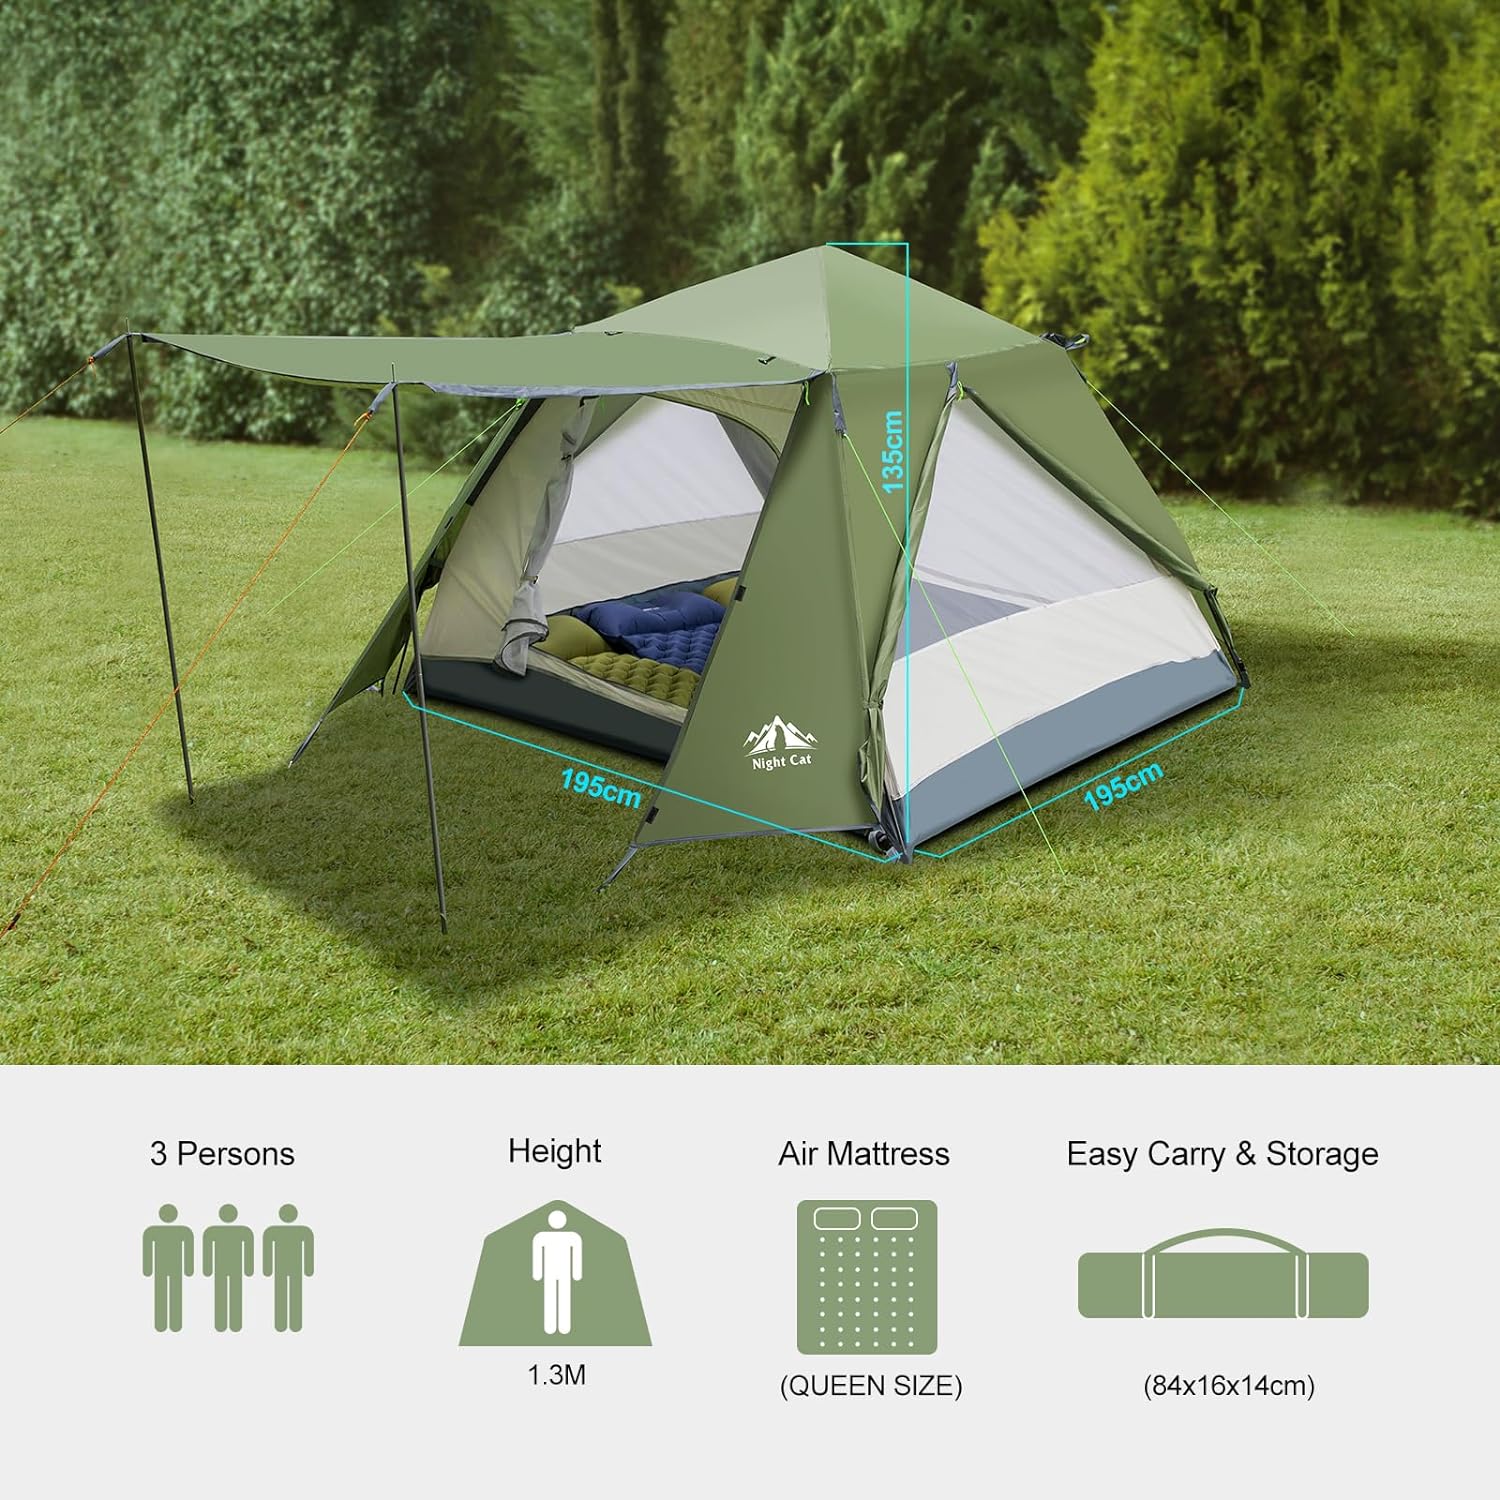 Night Cat Instant Pop Up Cabin Tent with Rainfly 2-3 Person